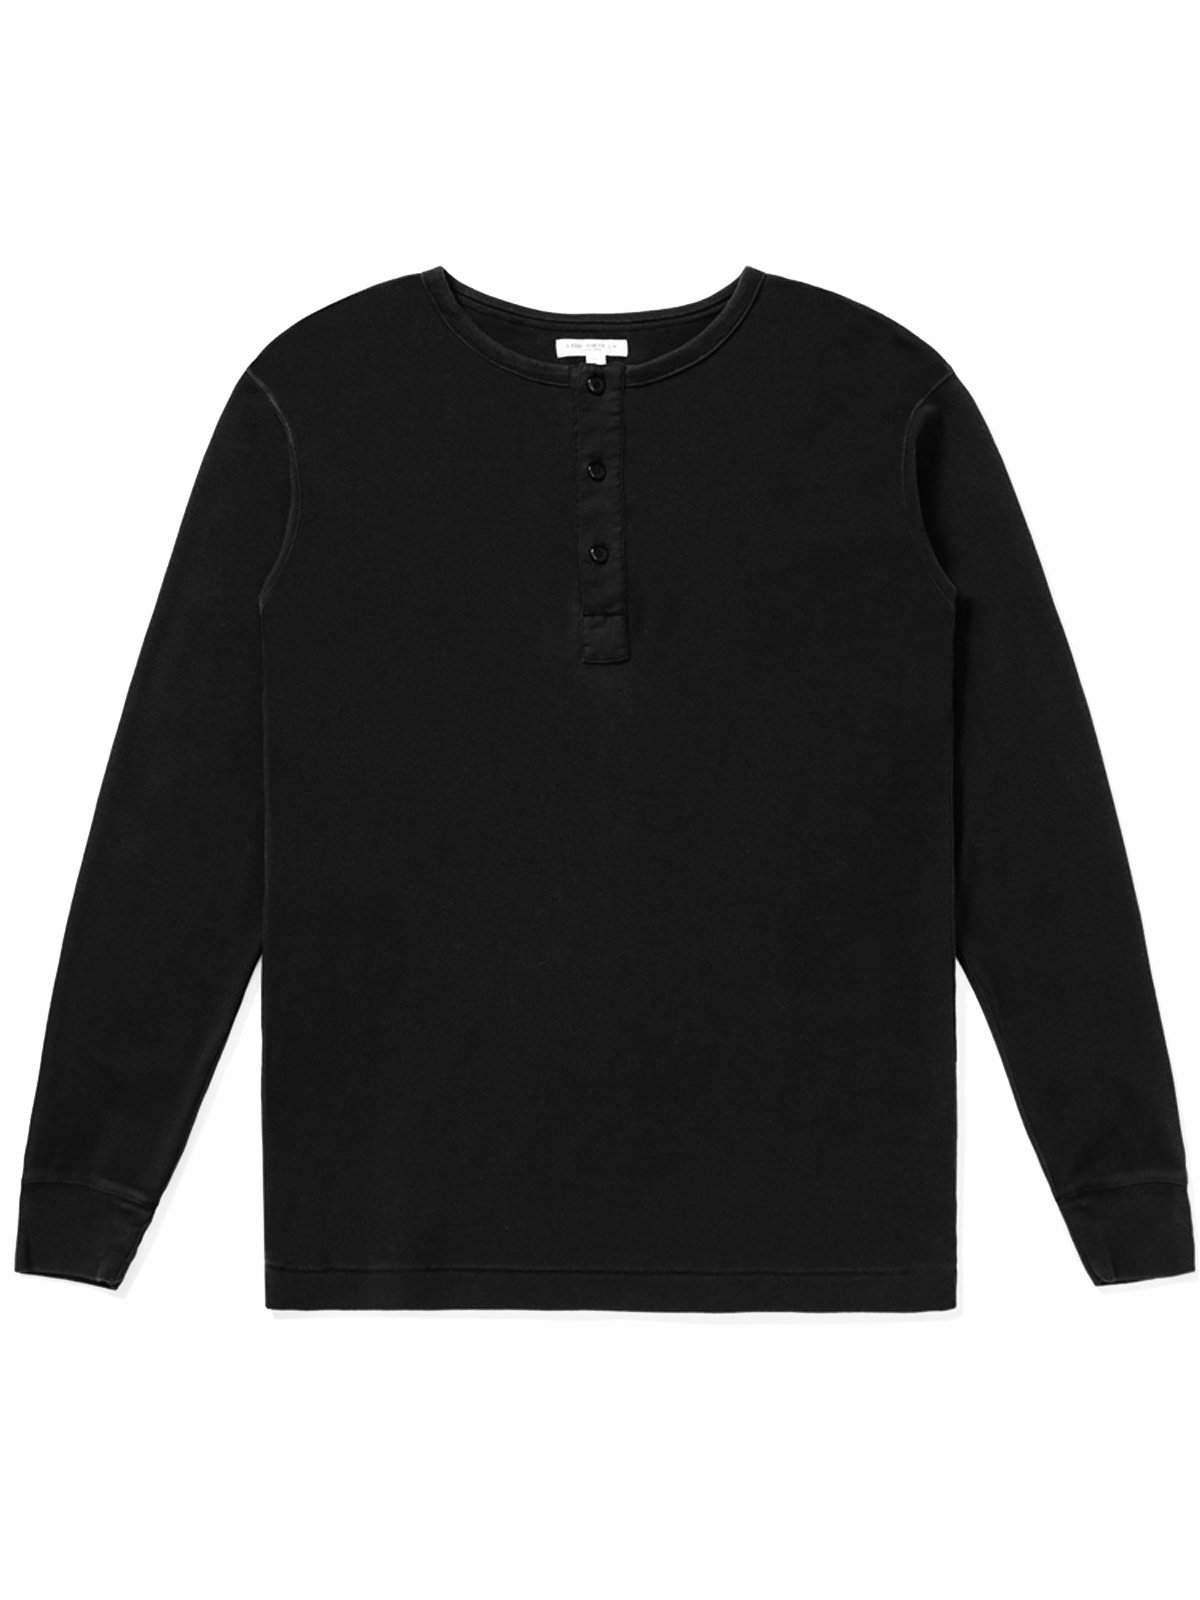 Lady White Co. Henley Black - MORE by Morello Indonesia